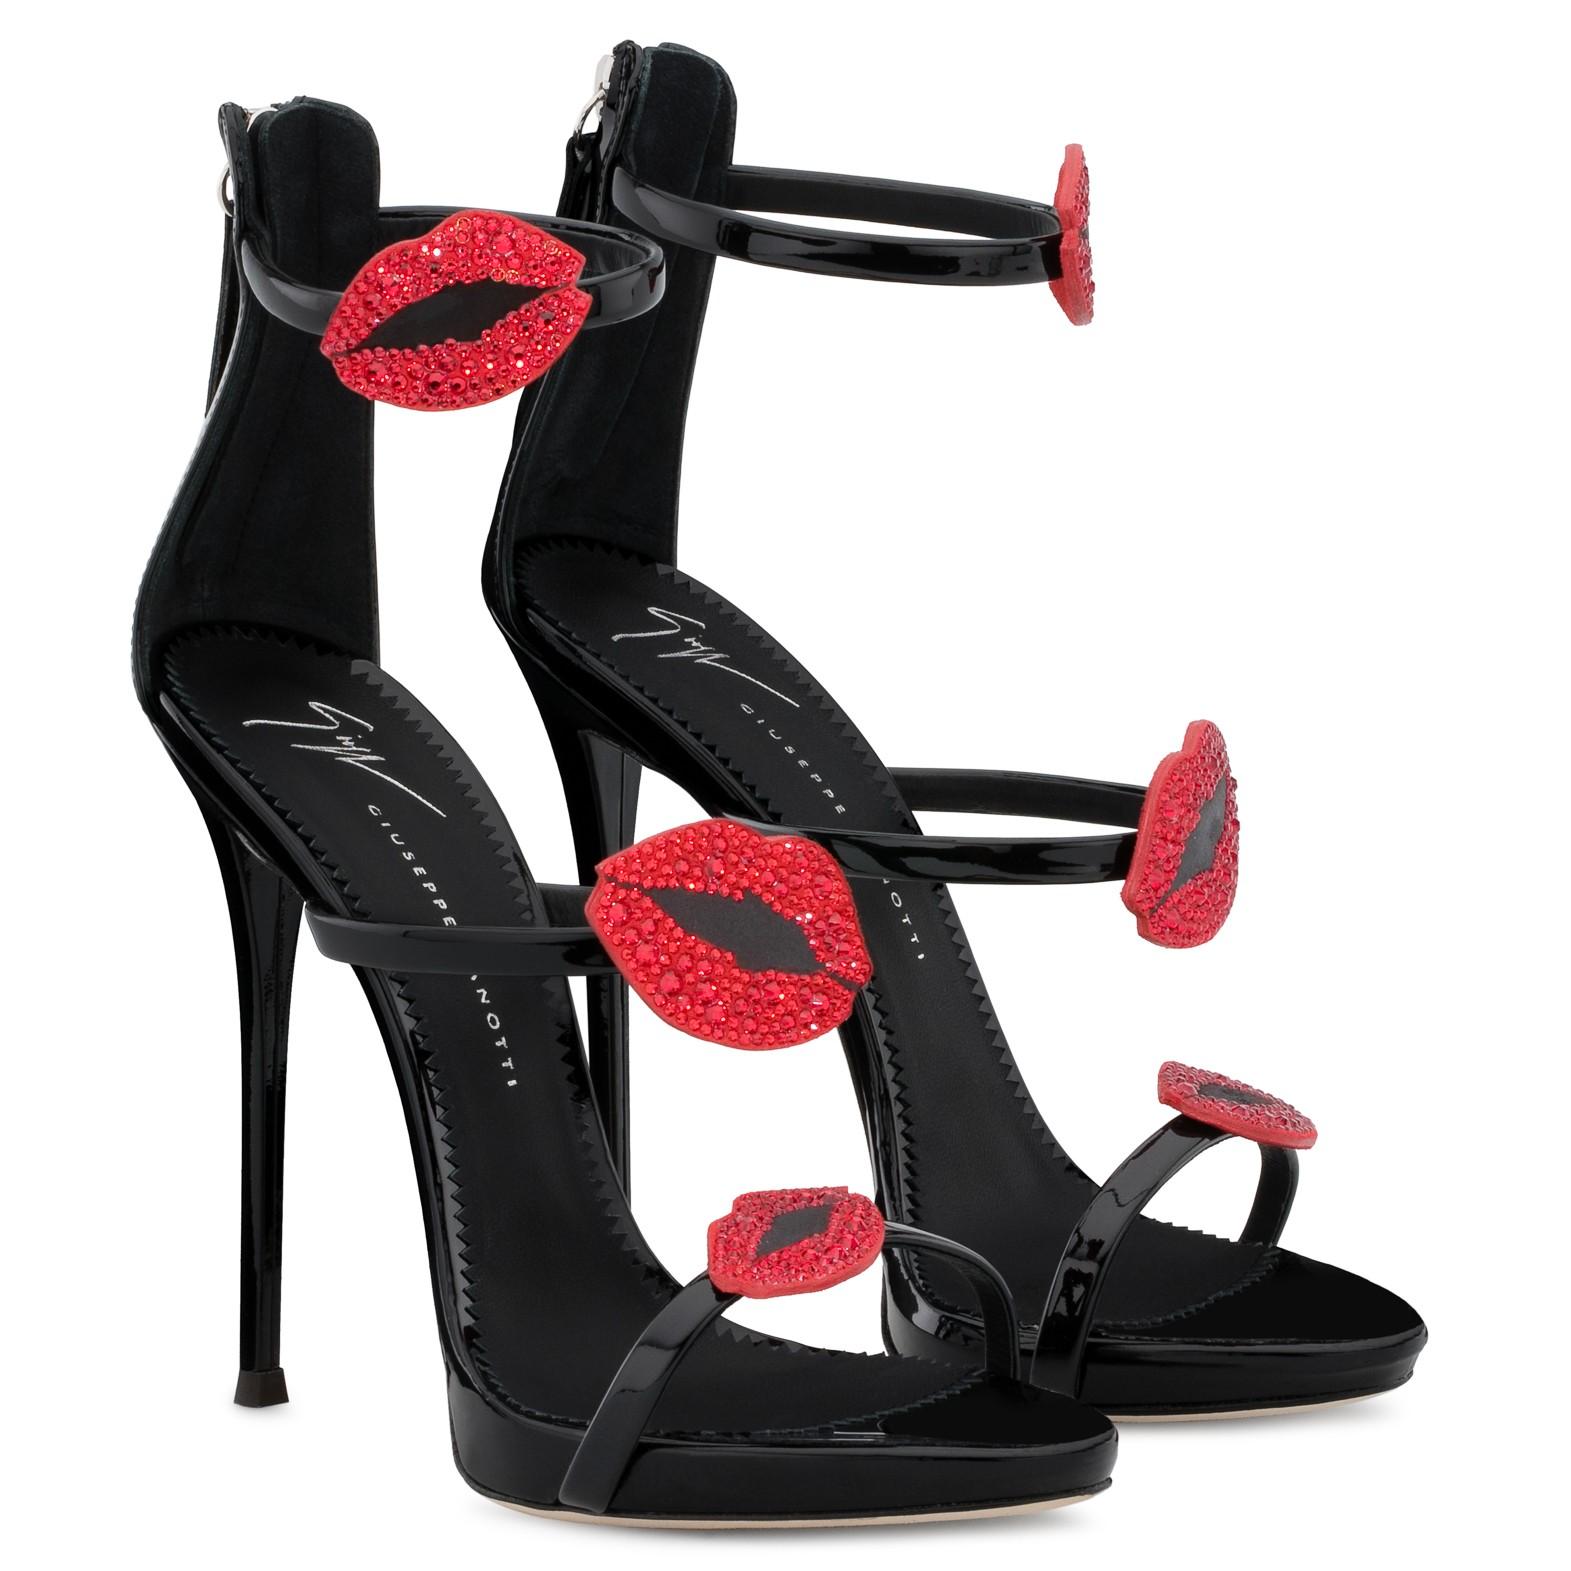 Giuseppe Zanotti NEW Black Patent Red Crystal Evening Sandals Heels in Box 1